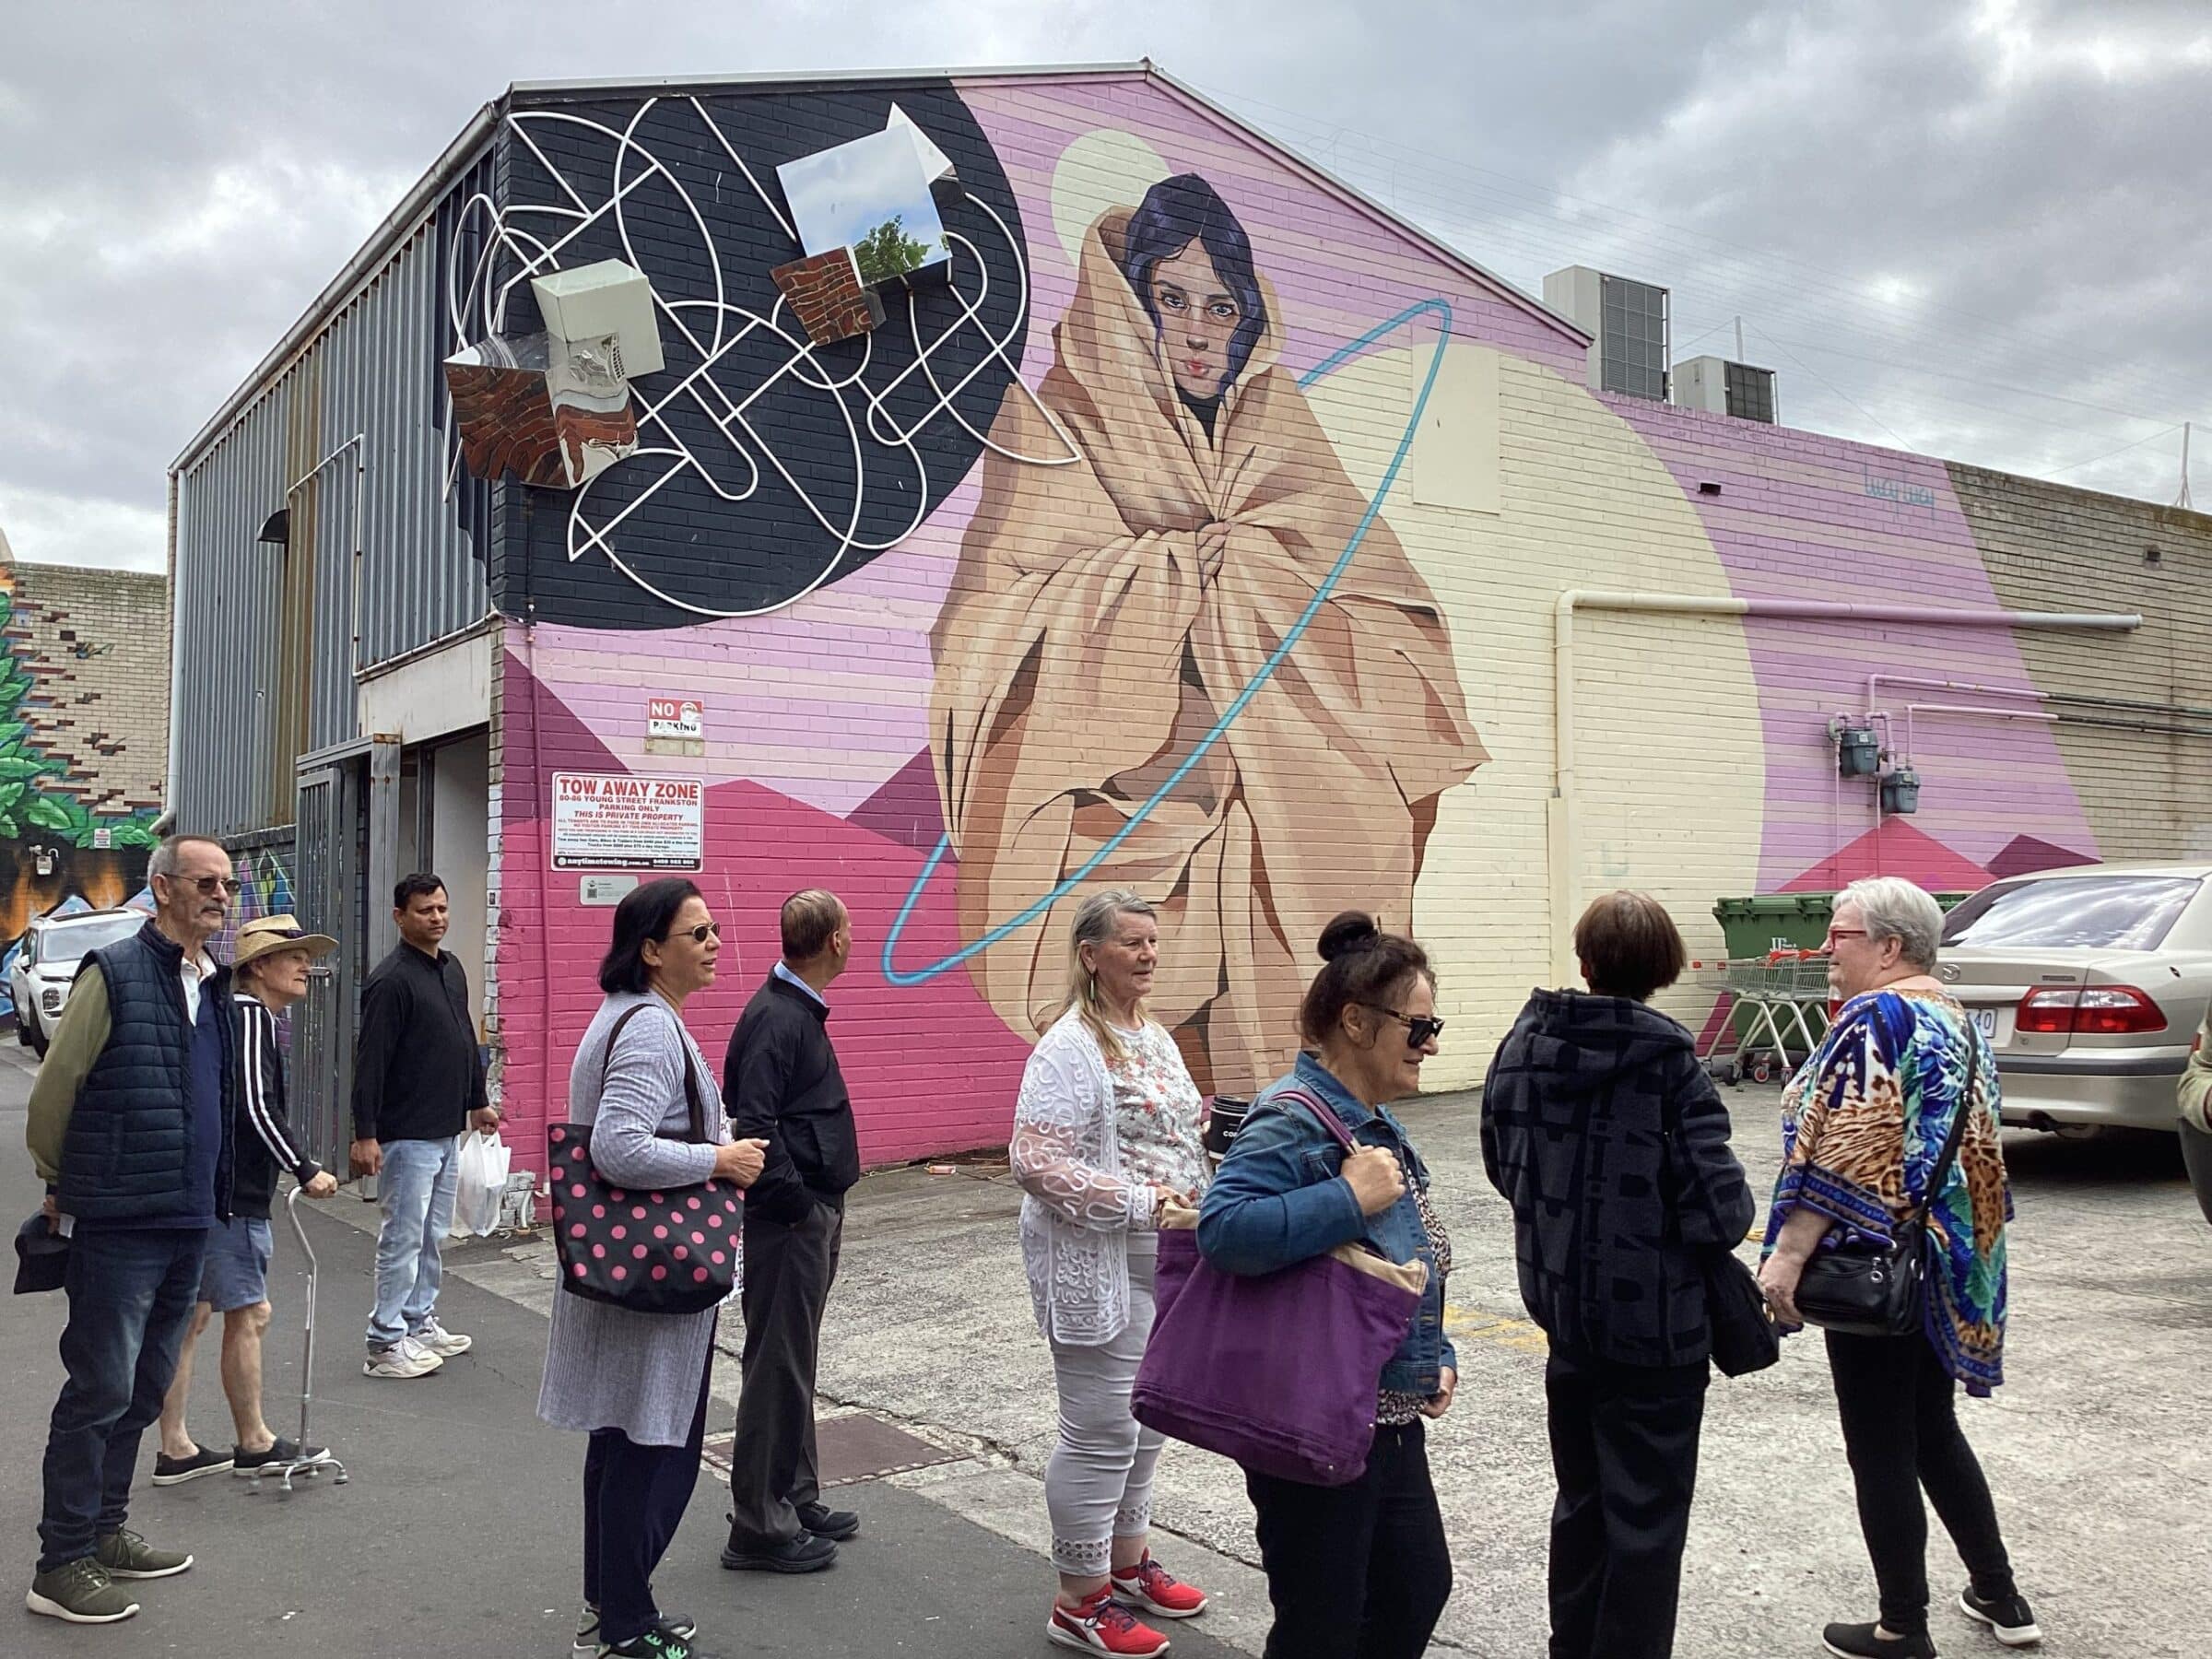 The South Eastern Metropolitan region on a recent excursion with the people we support to visit Frankston street art.